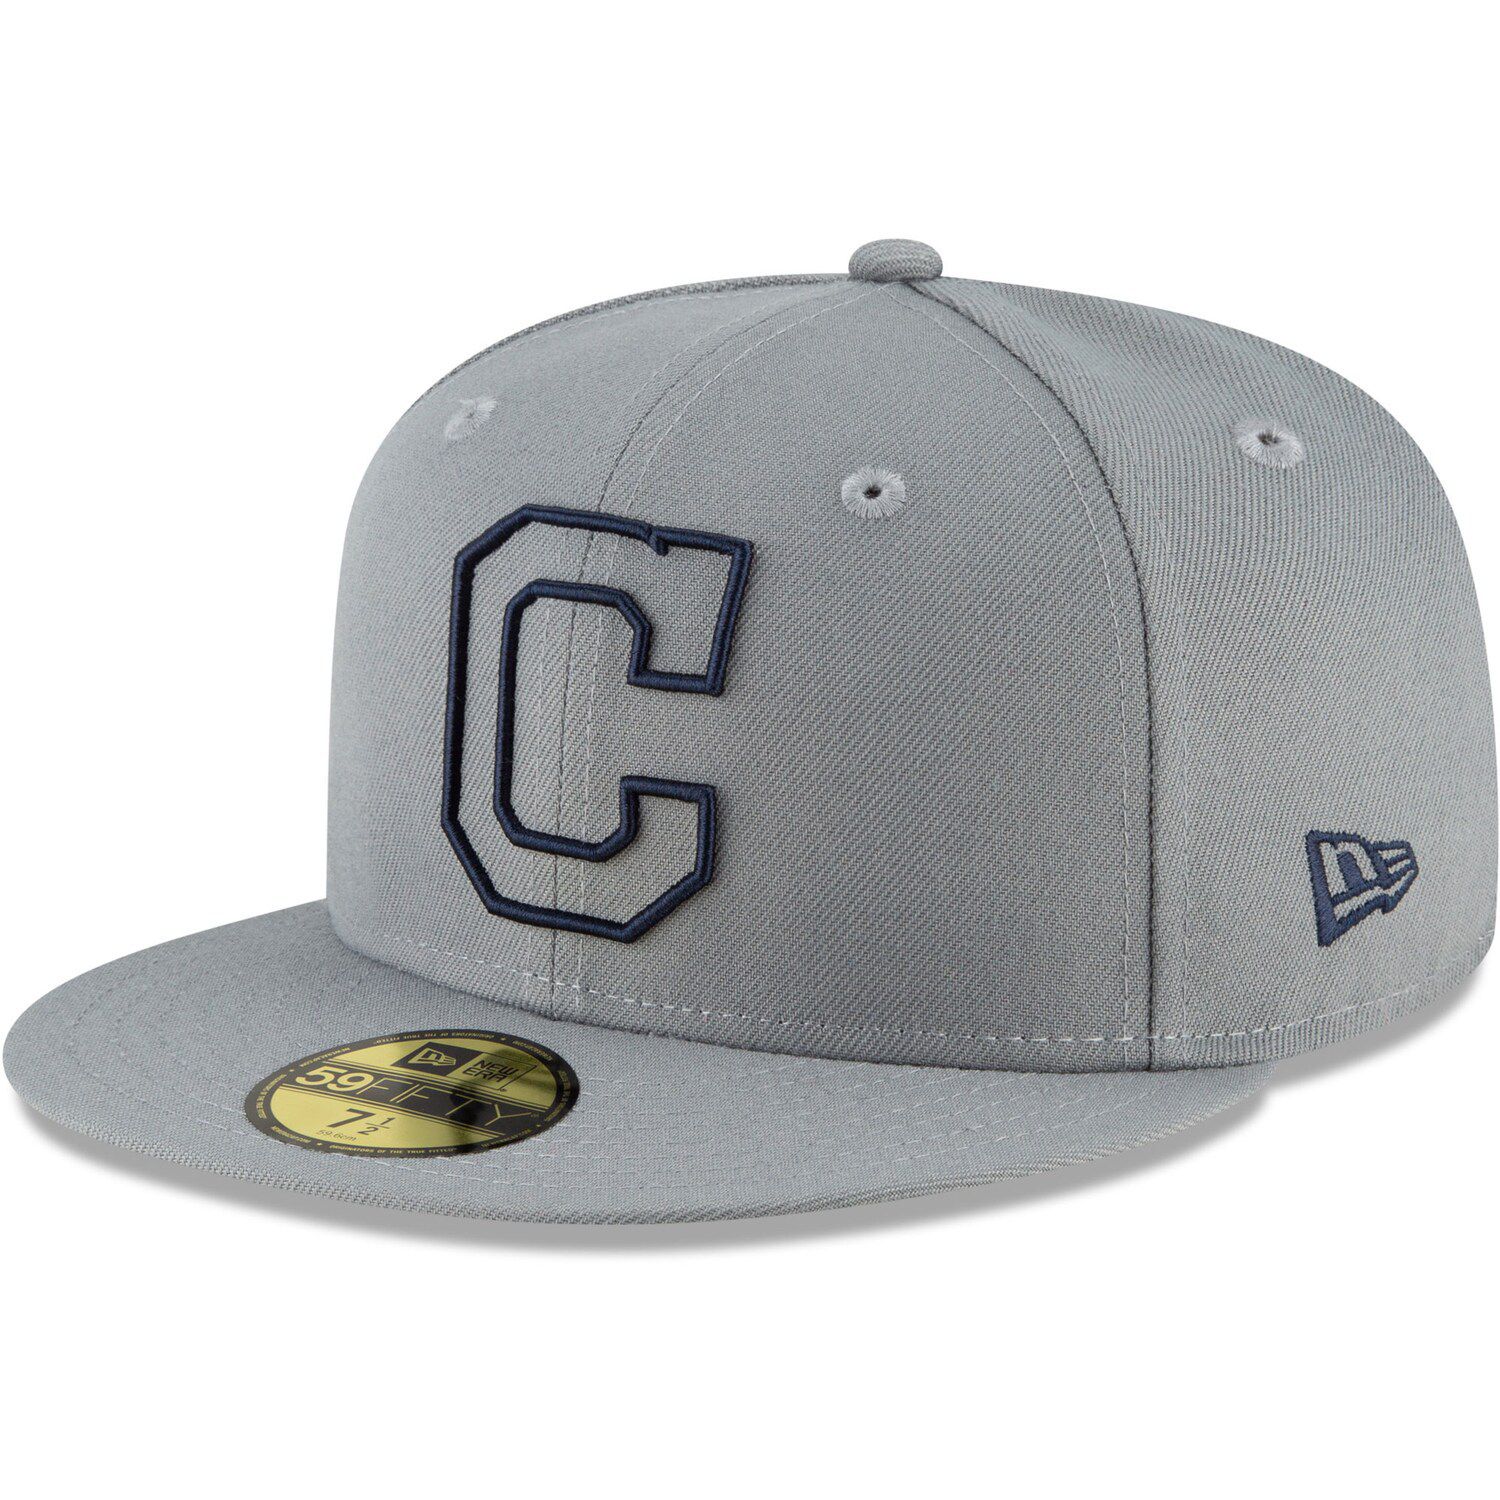 Men’s Cleveland Indians Gray Alternate Logo Elements 59FIFTY Fitted Hats